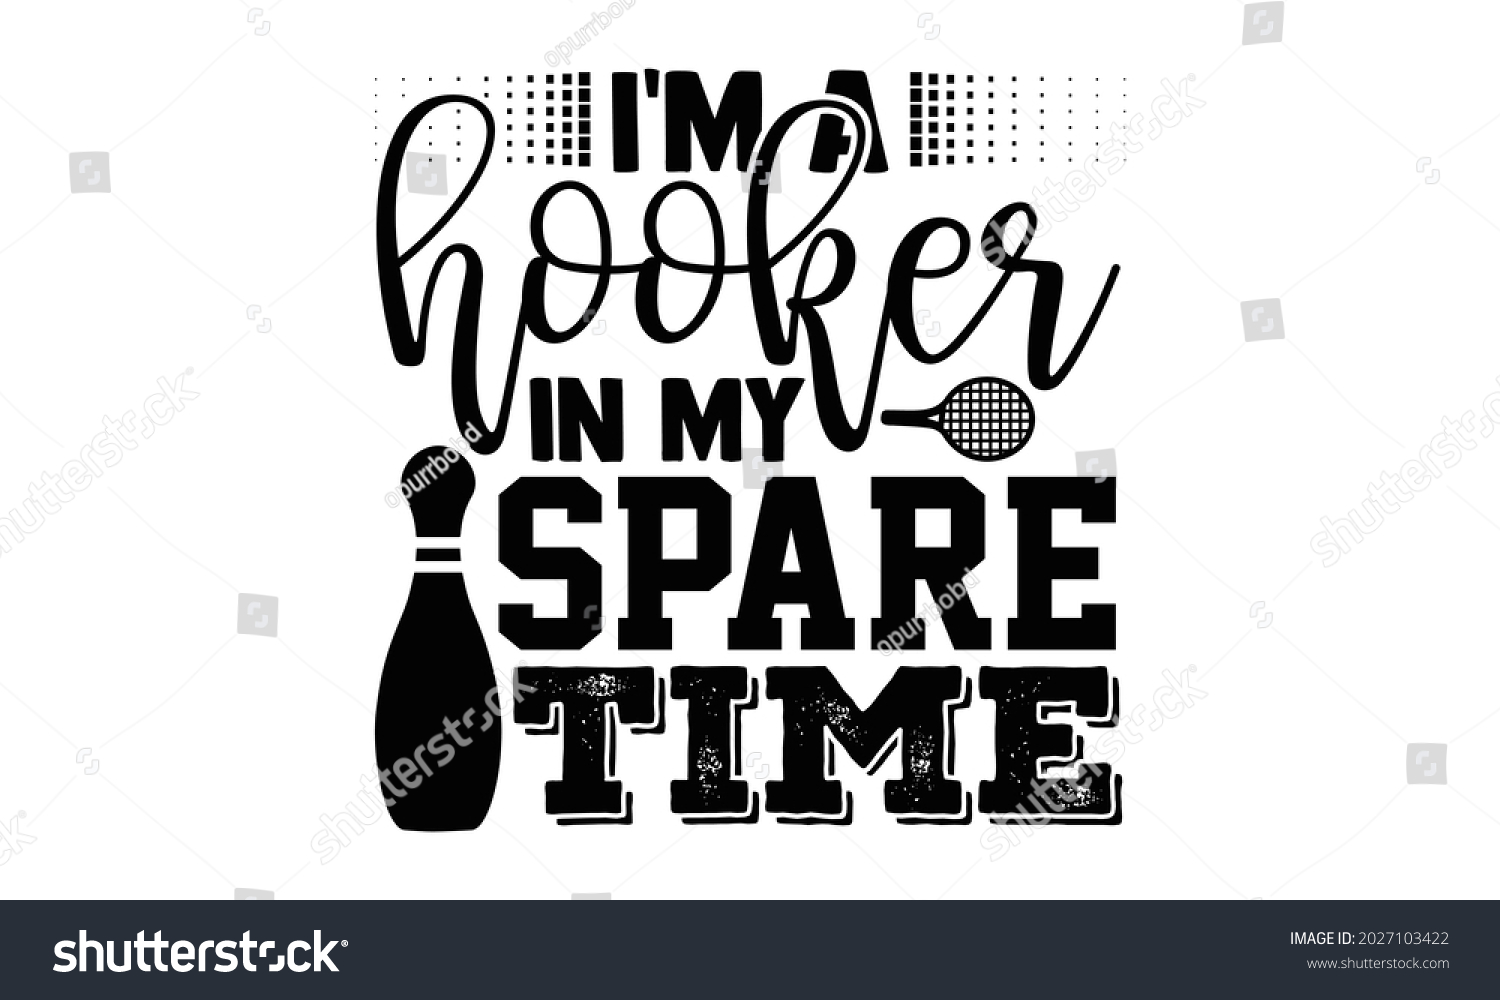 SVG of I'm a hooker in my spare time- Bowling t shirts design, Hand drawn lettering phrase, Calligraphy t shirt design, Isolated on white background, svg Files for Cutting Cricut, Silhouette, EPS 10 svg